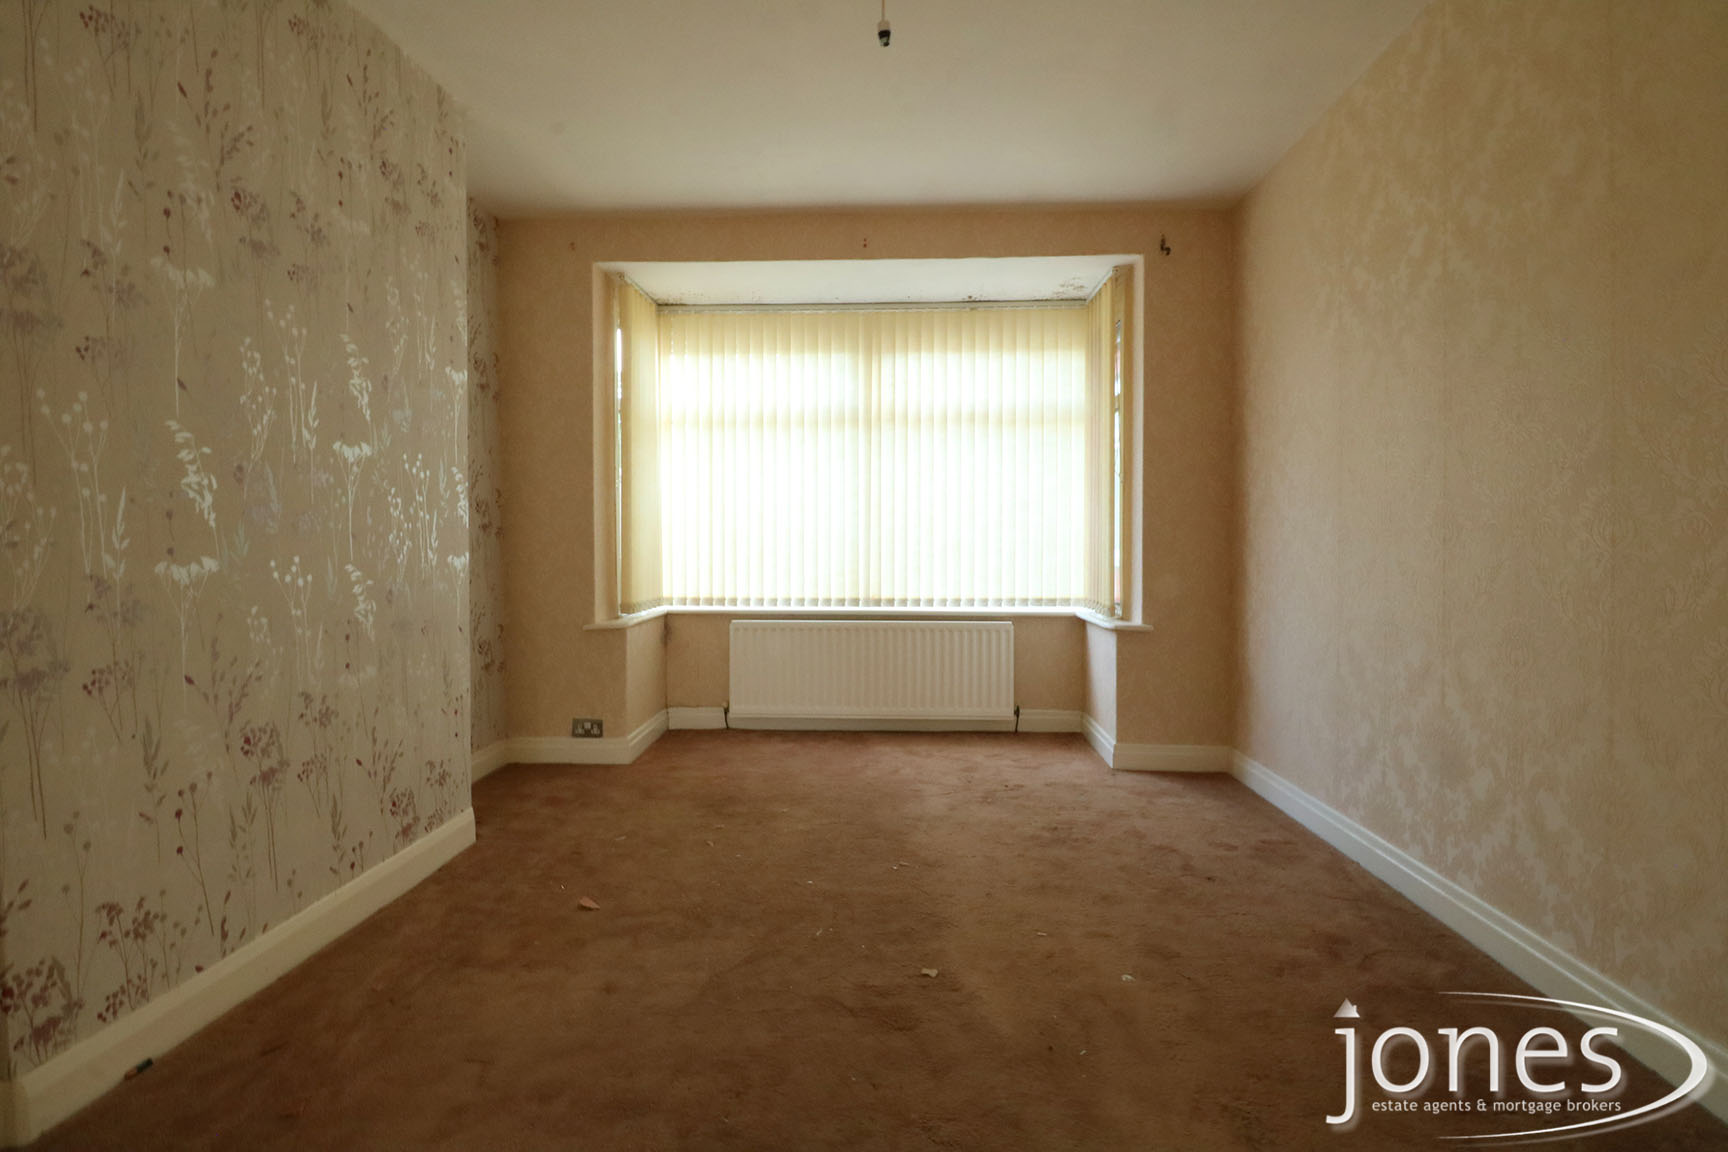 Home for Sale Let - Photo 03 Keithlands Avenue, Norton, Stockton on Tees, TS20